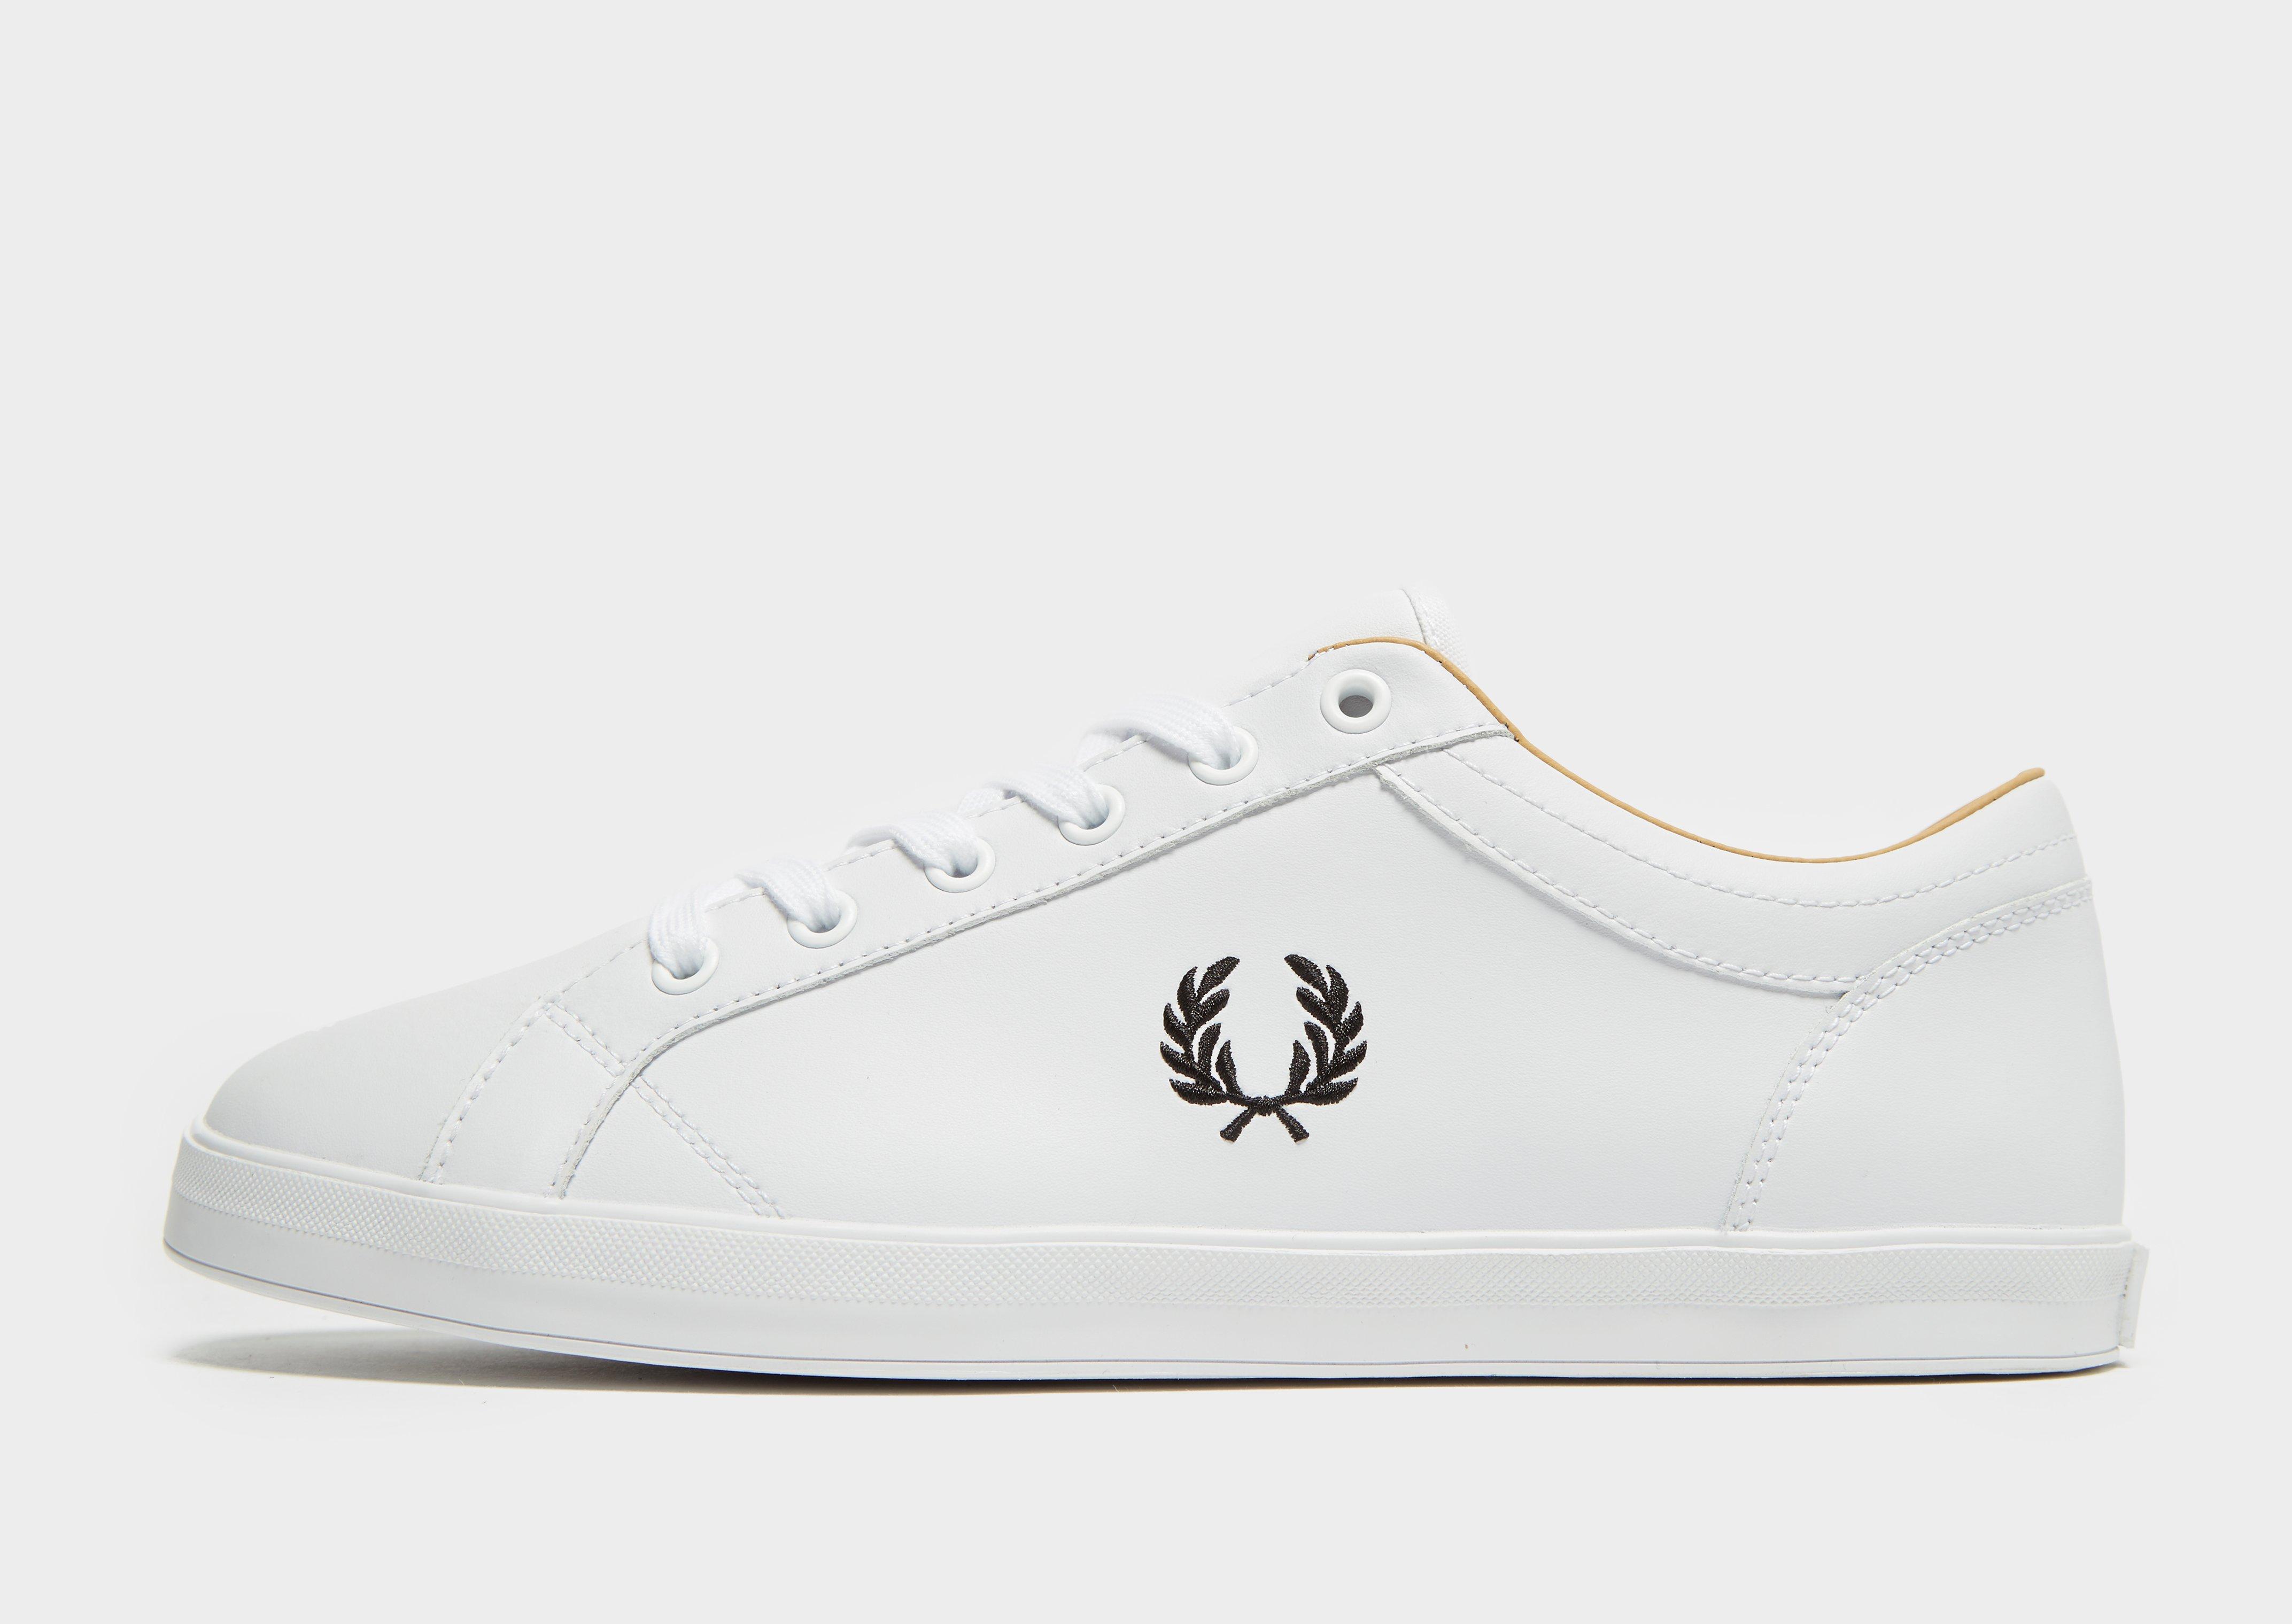 fred perry baseline leather